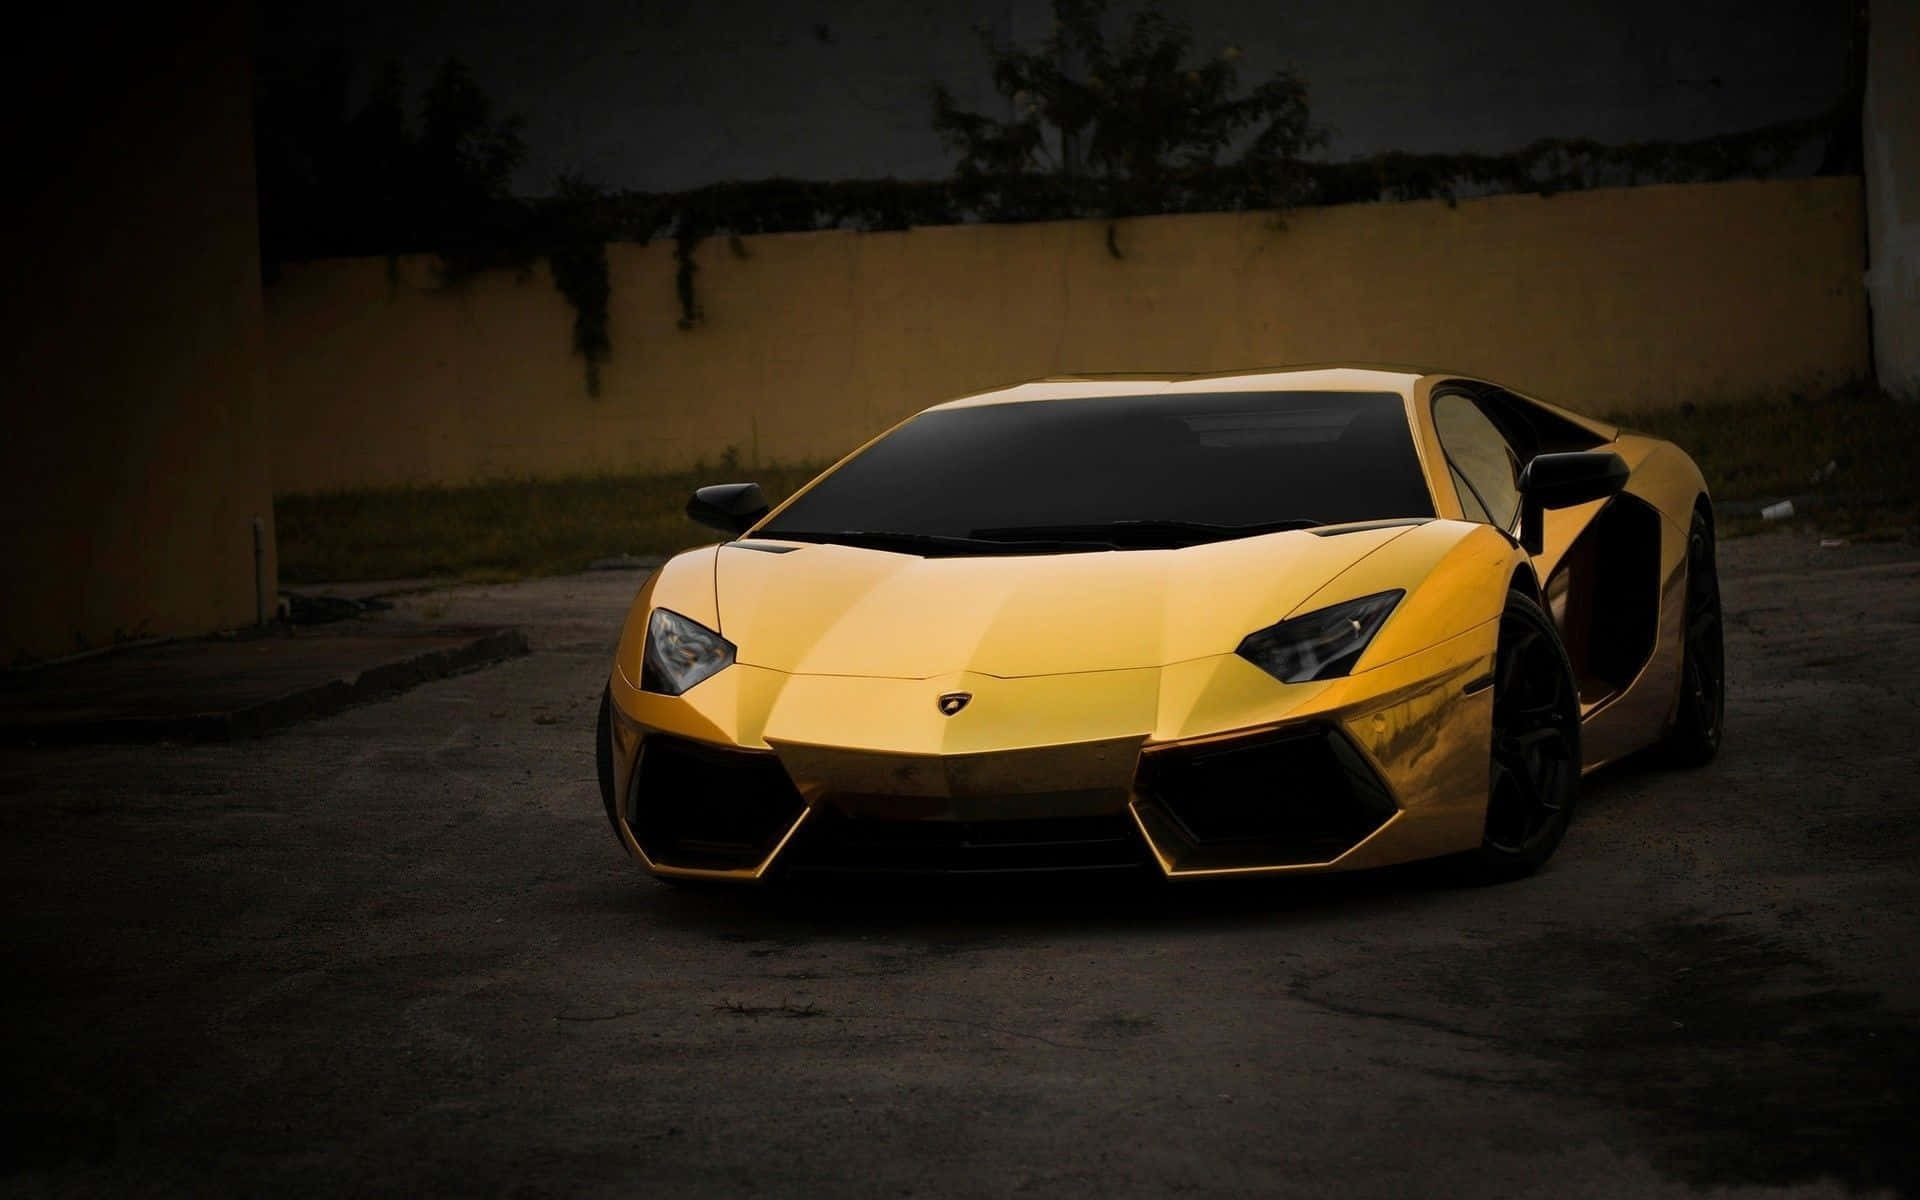 Get behind the wheel of a luxurious Gold Lamborghini Wallpaper